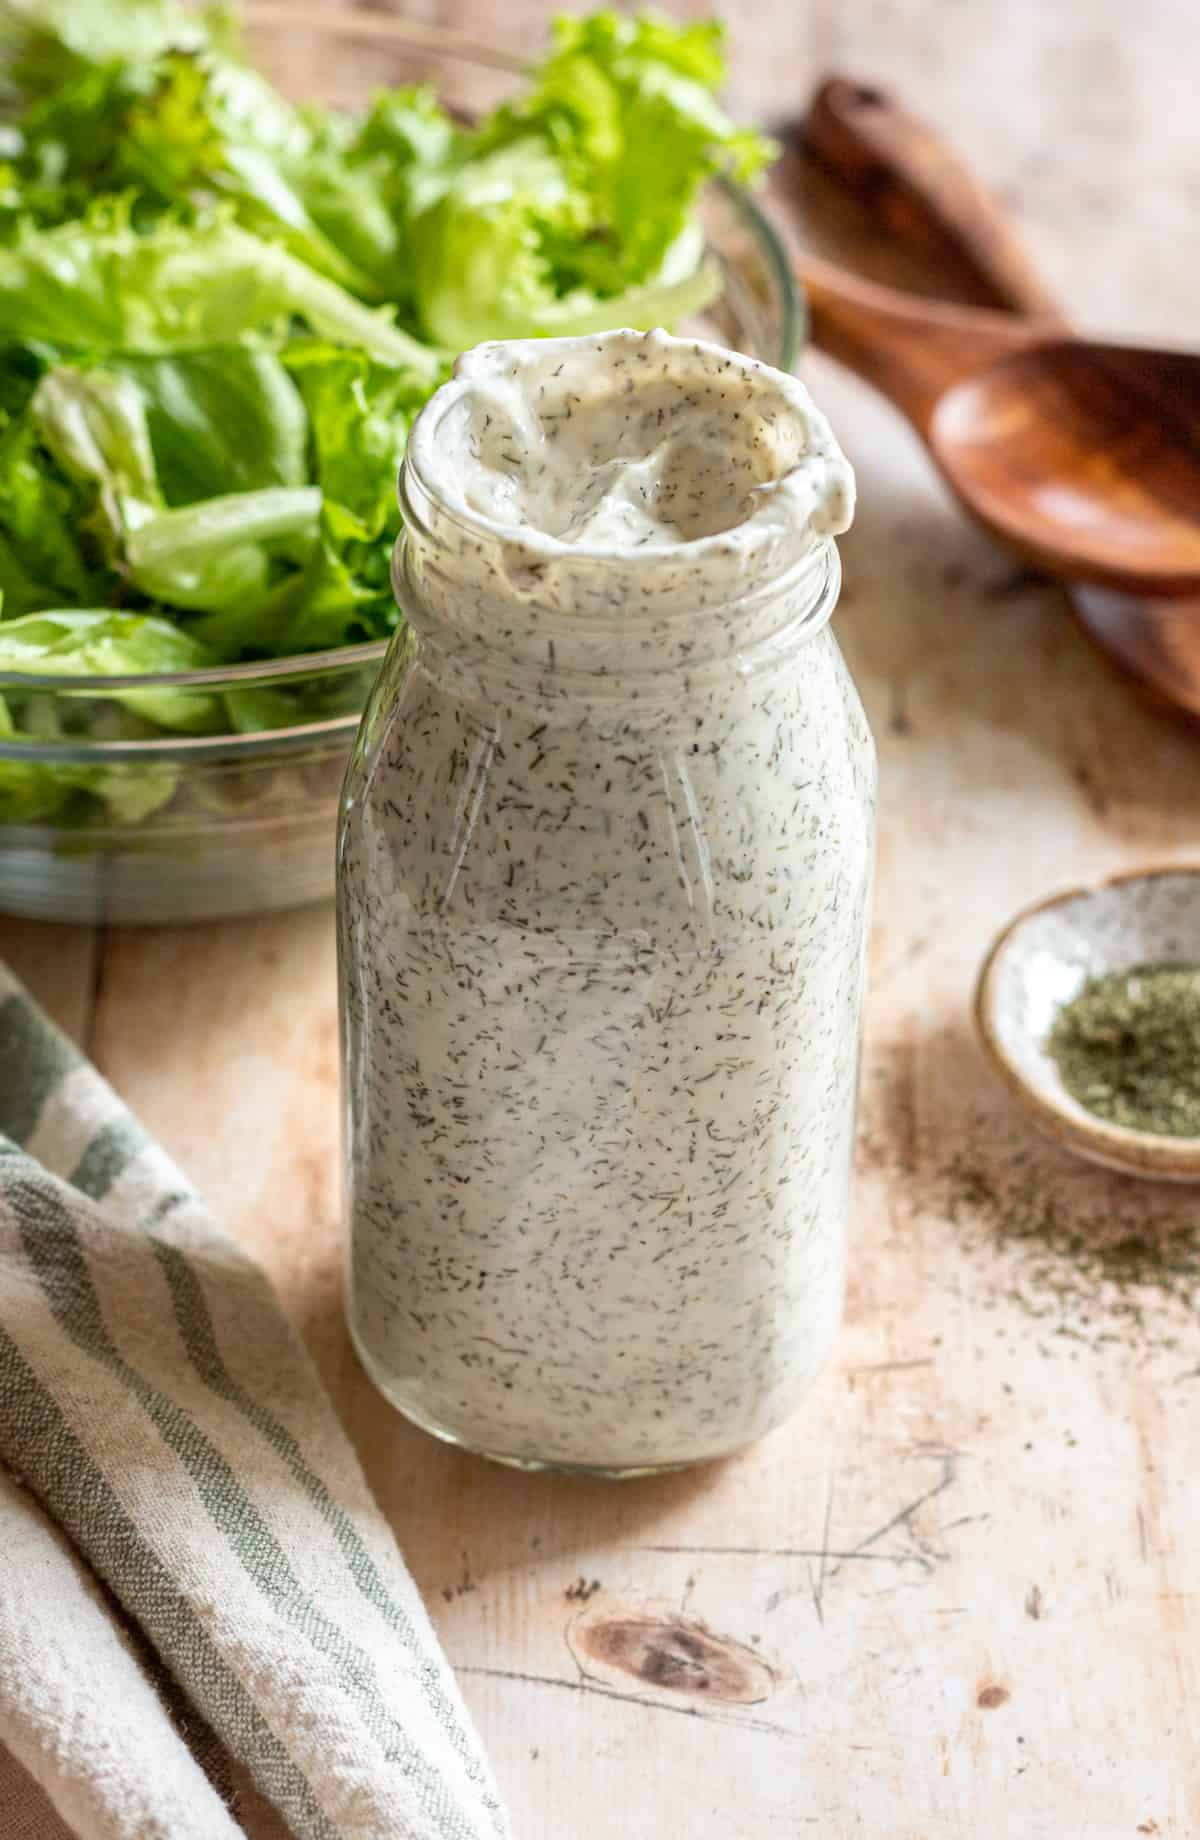 Creamy dill salad dressing in a glass jar, a bowl of lettuce and wooden salad spoons are in the background.